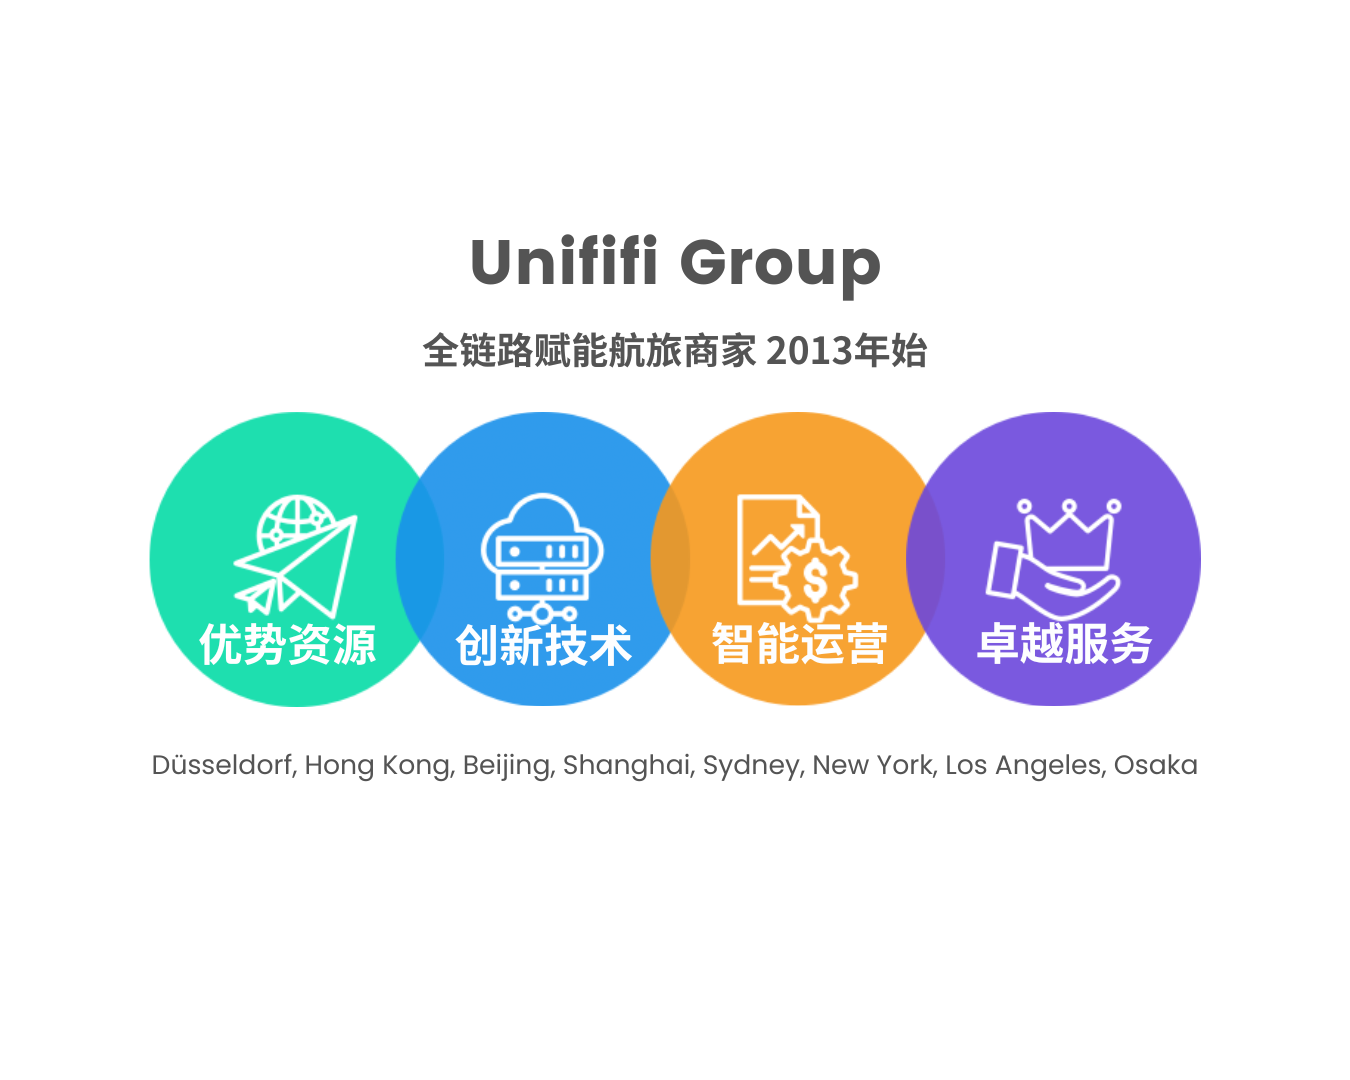 Unififi About Us All-in-one CN